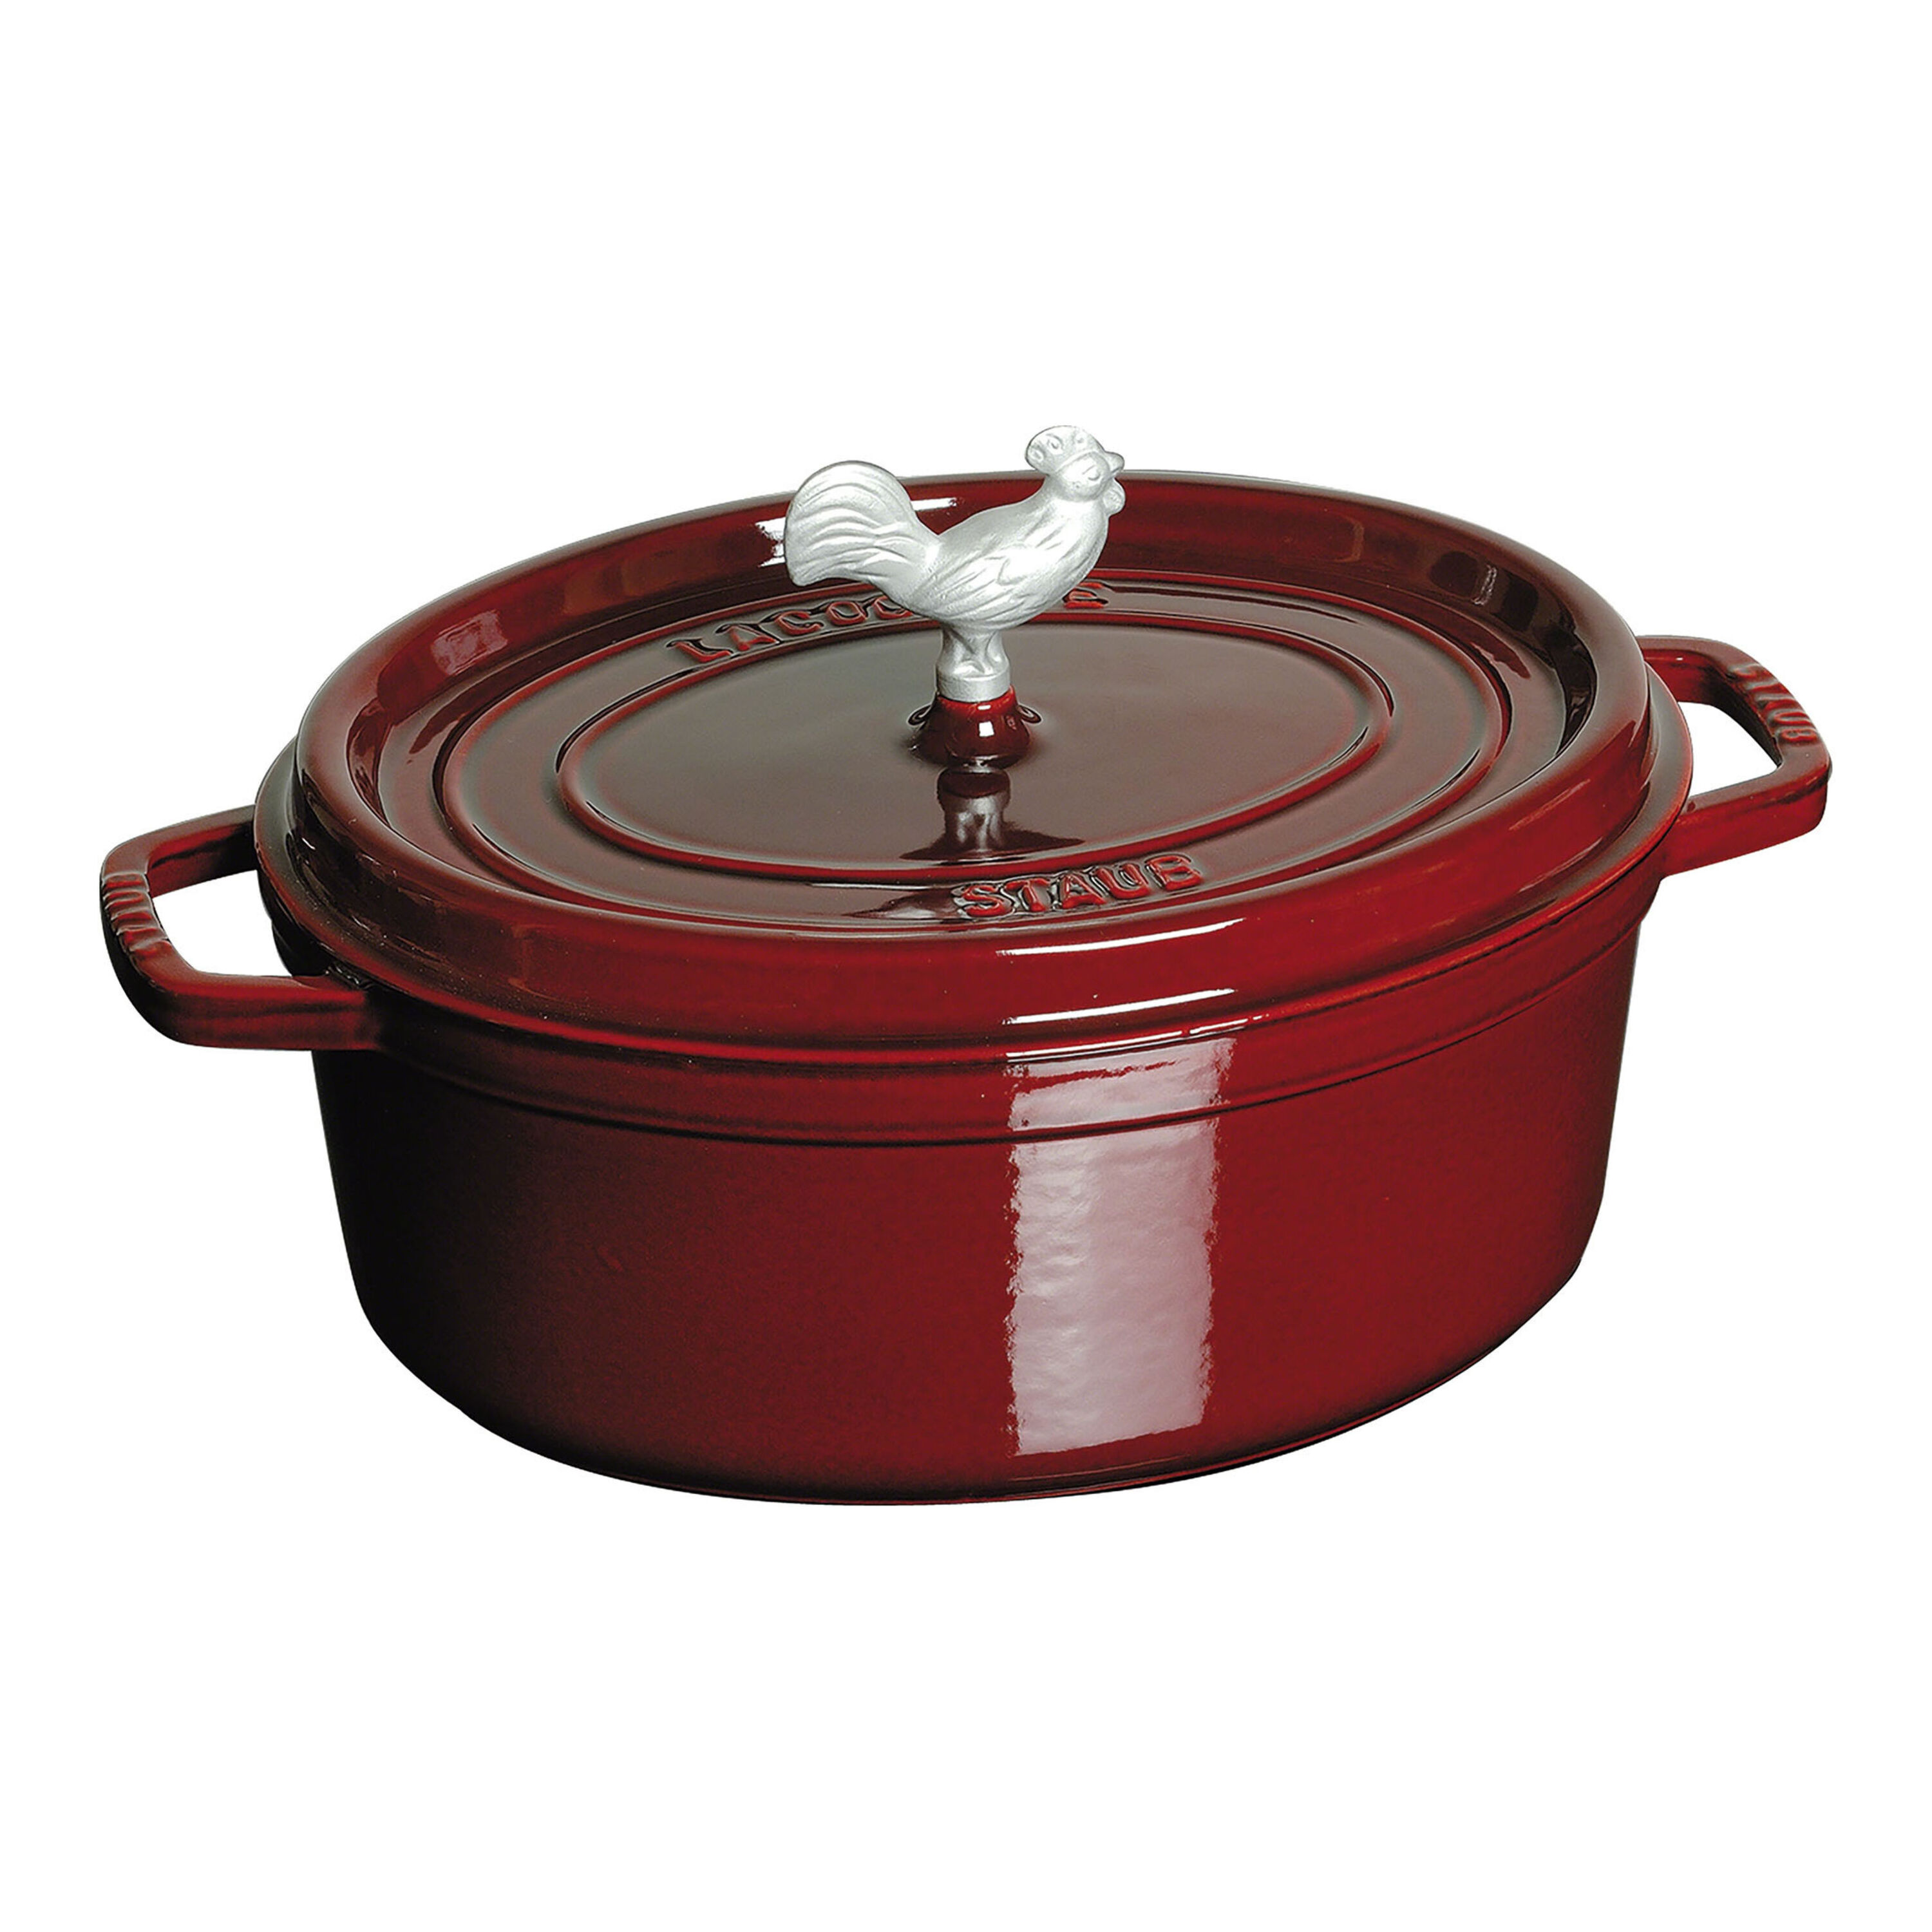 Staub Staub 5.75 quart Turquoise Oval Dutch Oven with Rooster Knob